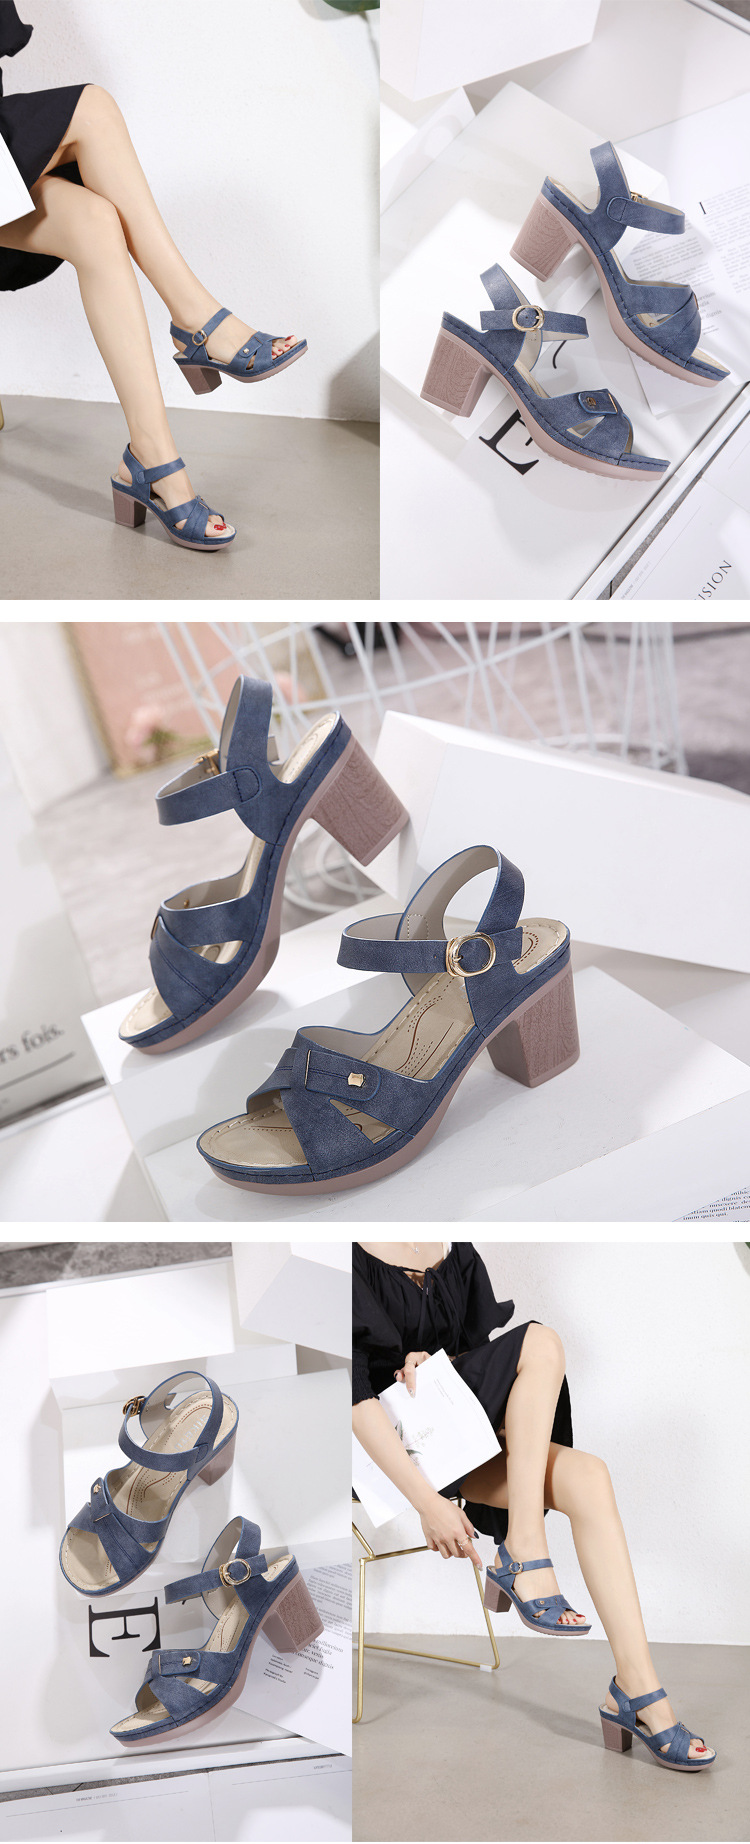 Summer New Women's High Heels Sandals Sexy Open Toe Thick Heels Waterproof Shoes Ankle Strap Fish Mouth Women Footwear q47